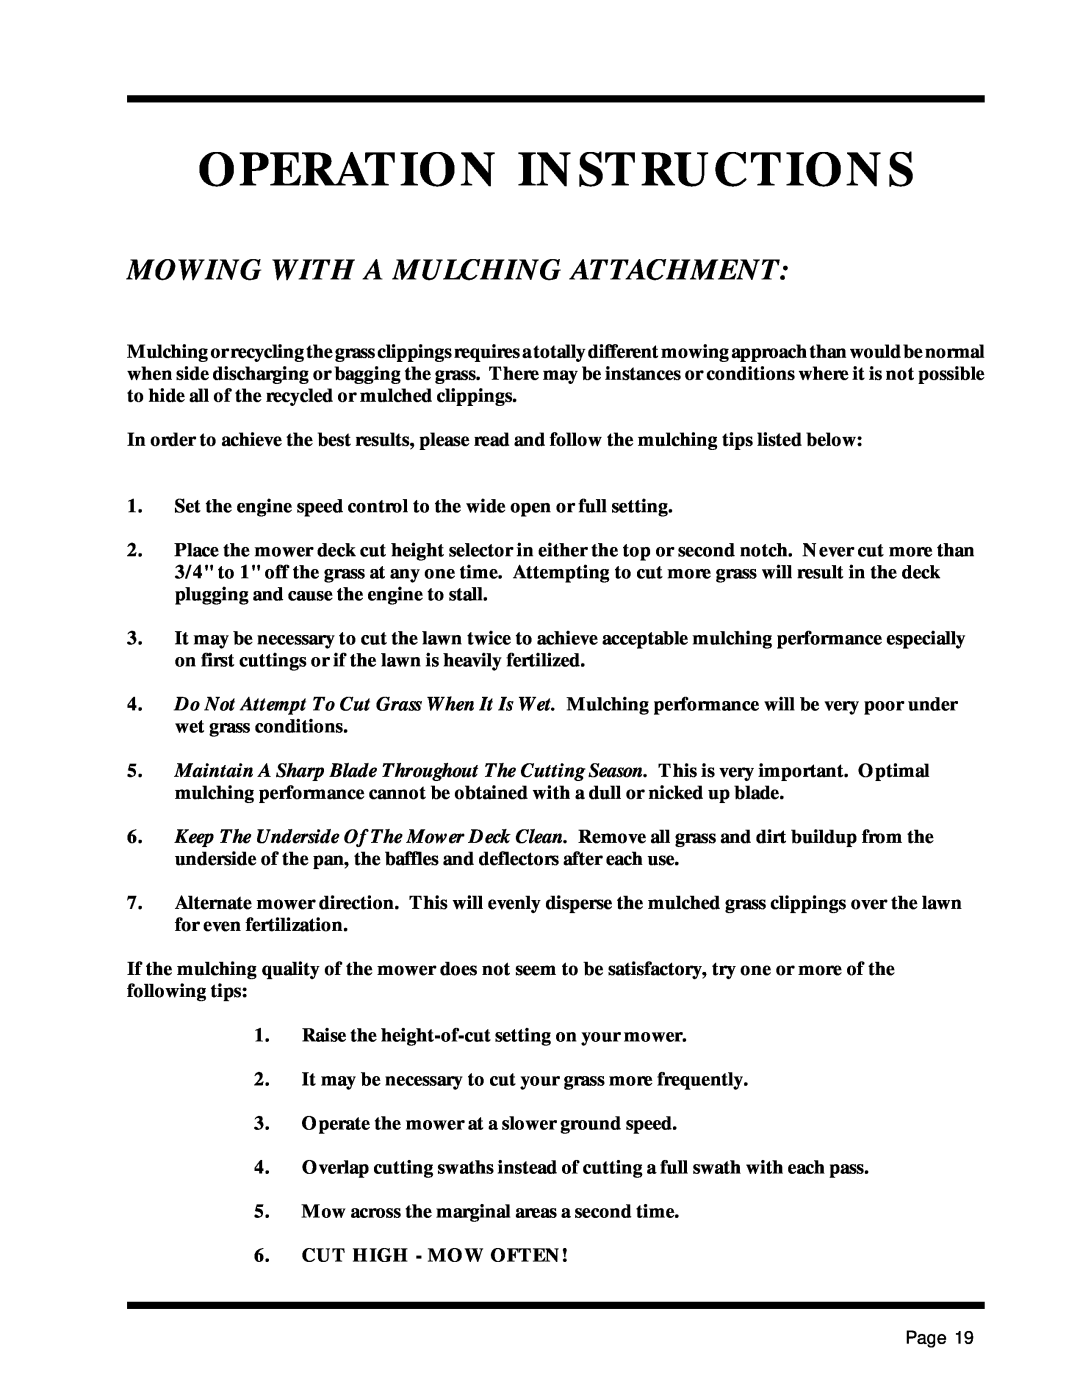 Dixon 13088-1100A manual Mowing With A Mulching Attachment, Operation Instructions 